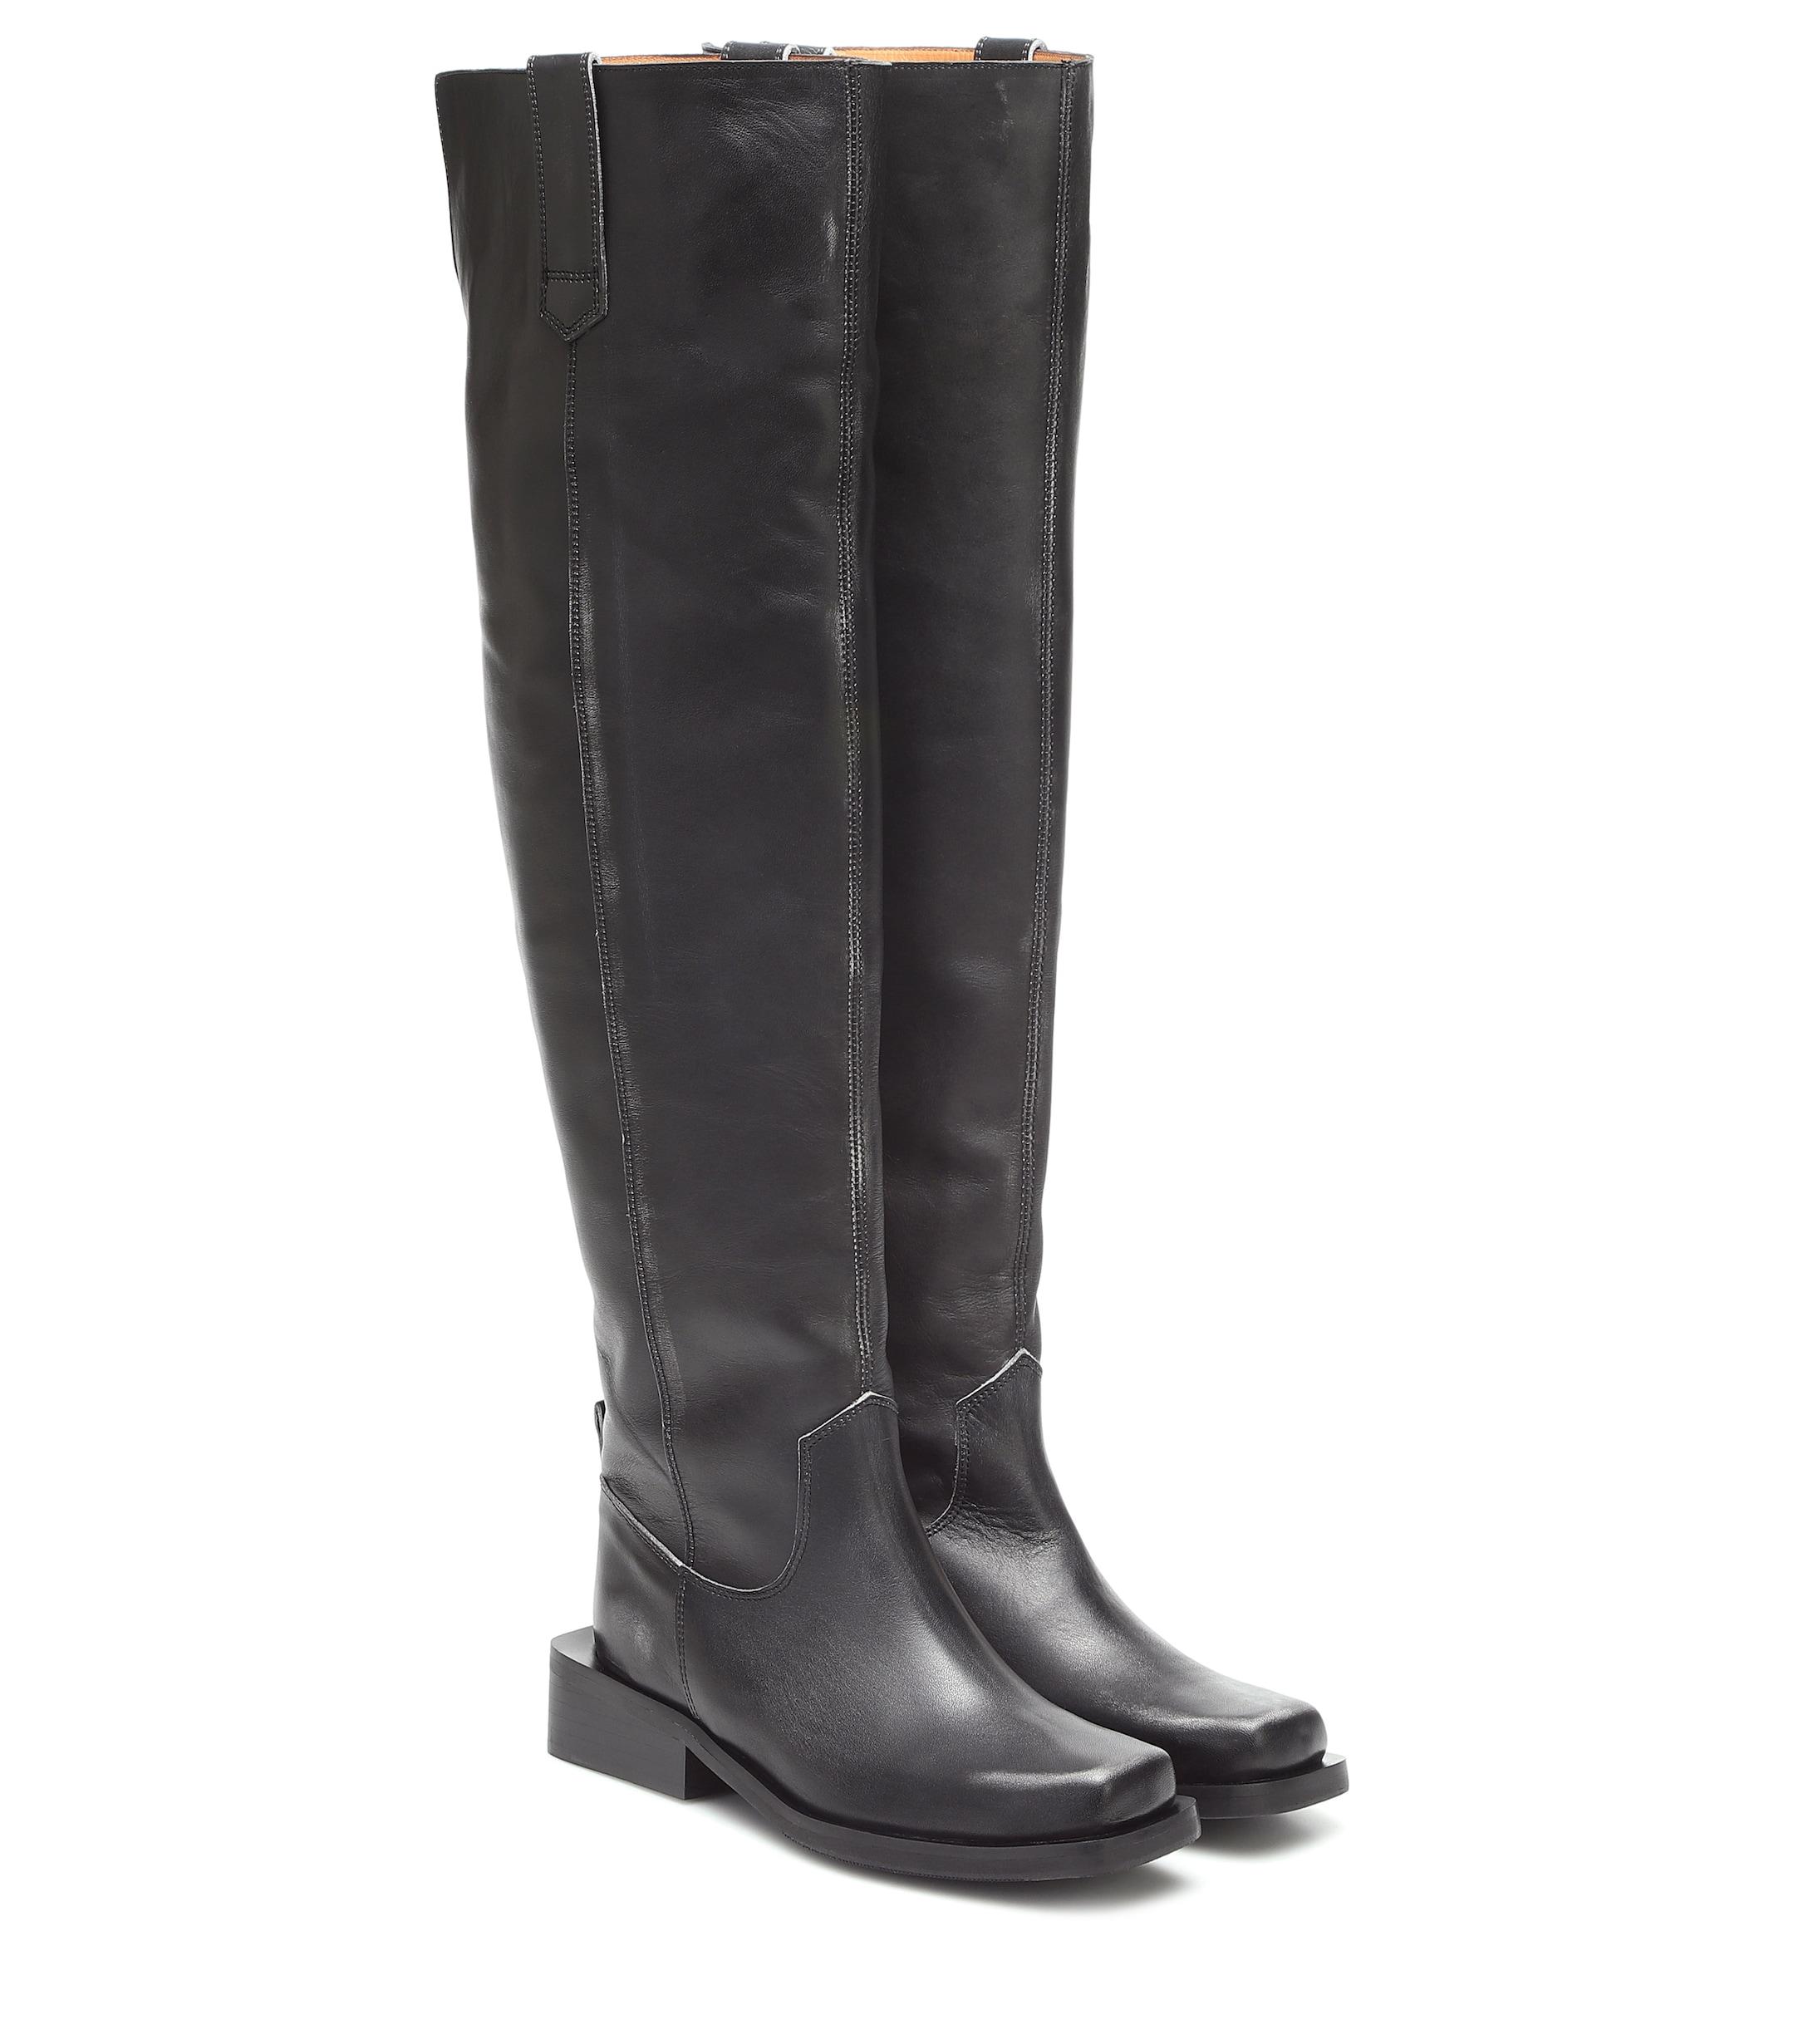 Ganni Mc Leather Over-the-knee Boots in Black - Lyst